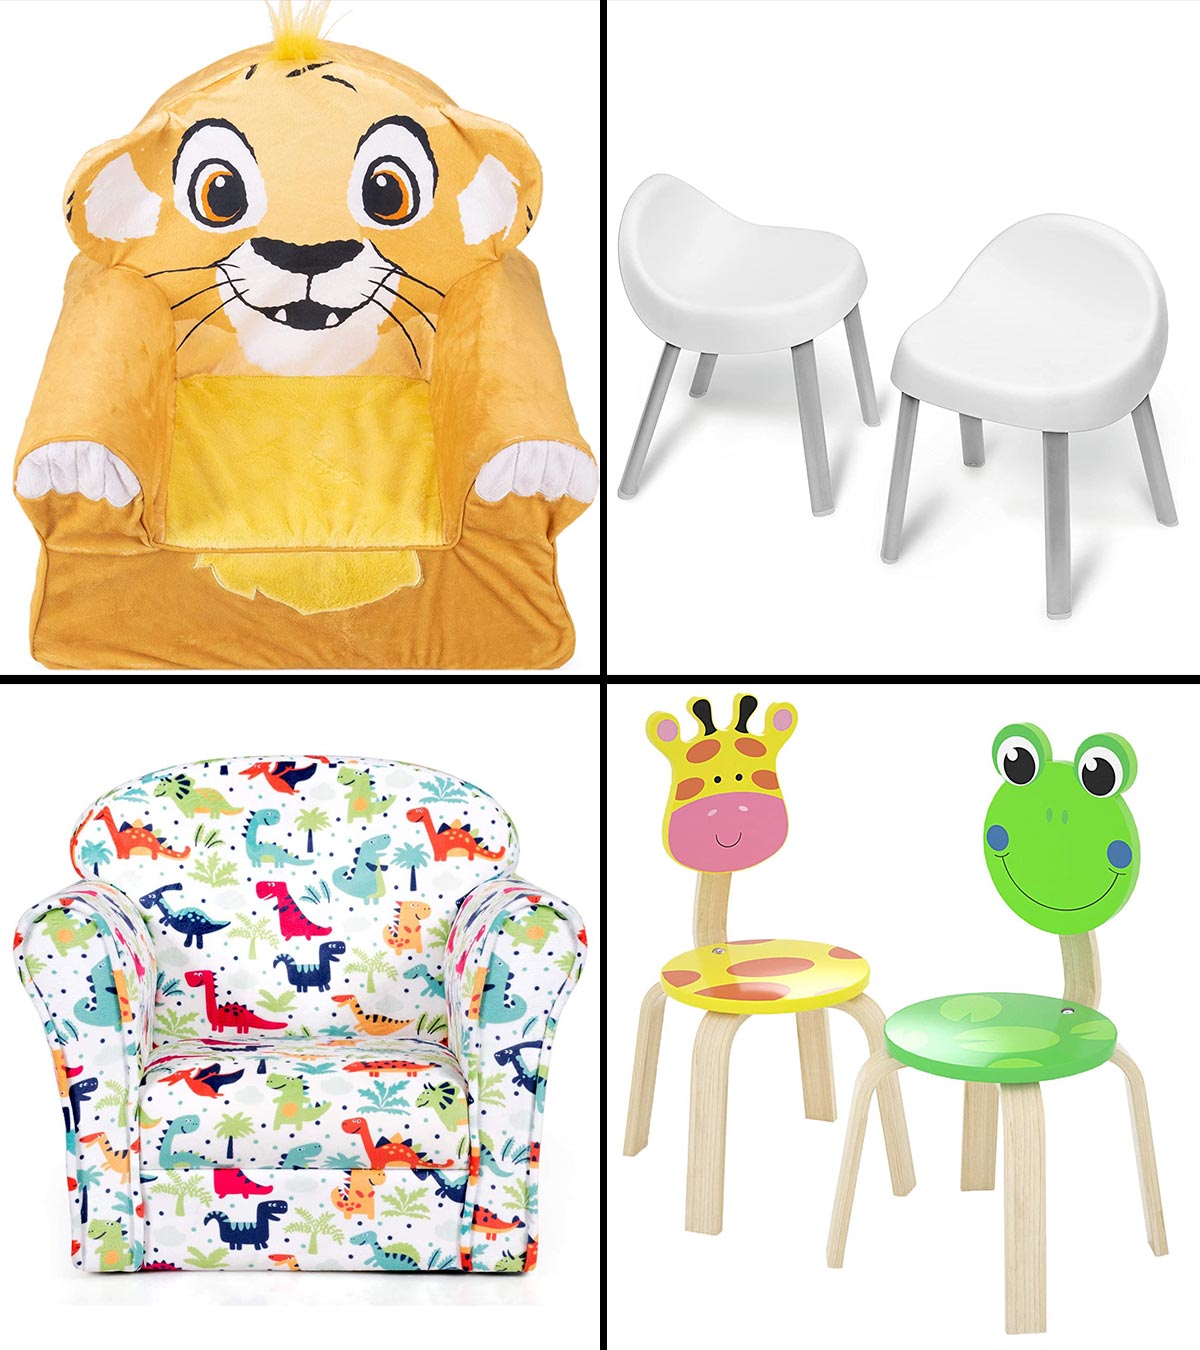 15 Best Toddler Chairs In 2023 To Help The Child Sit Comfortably